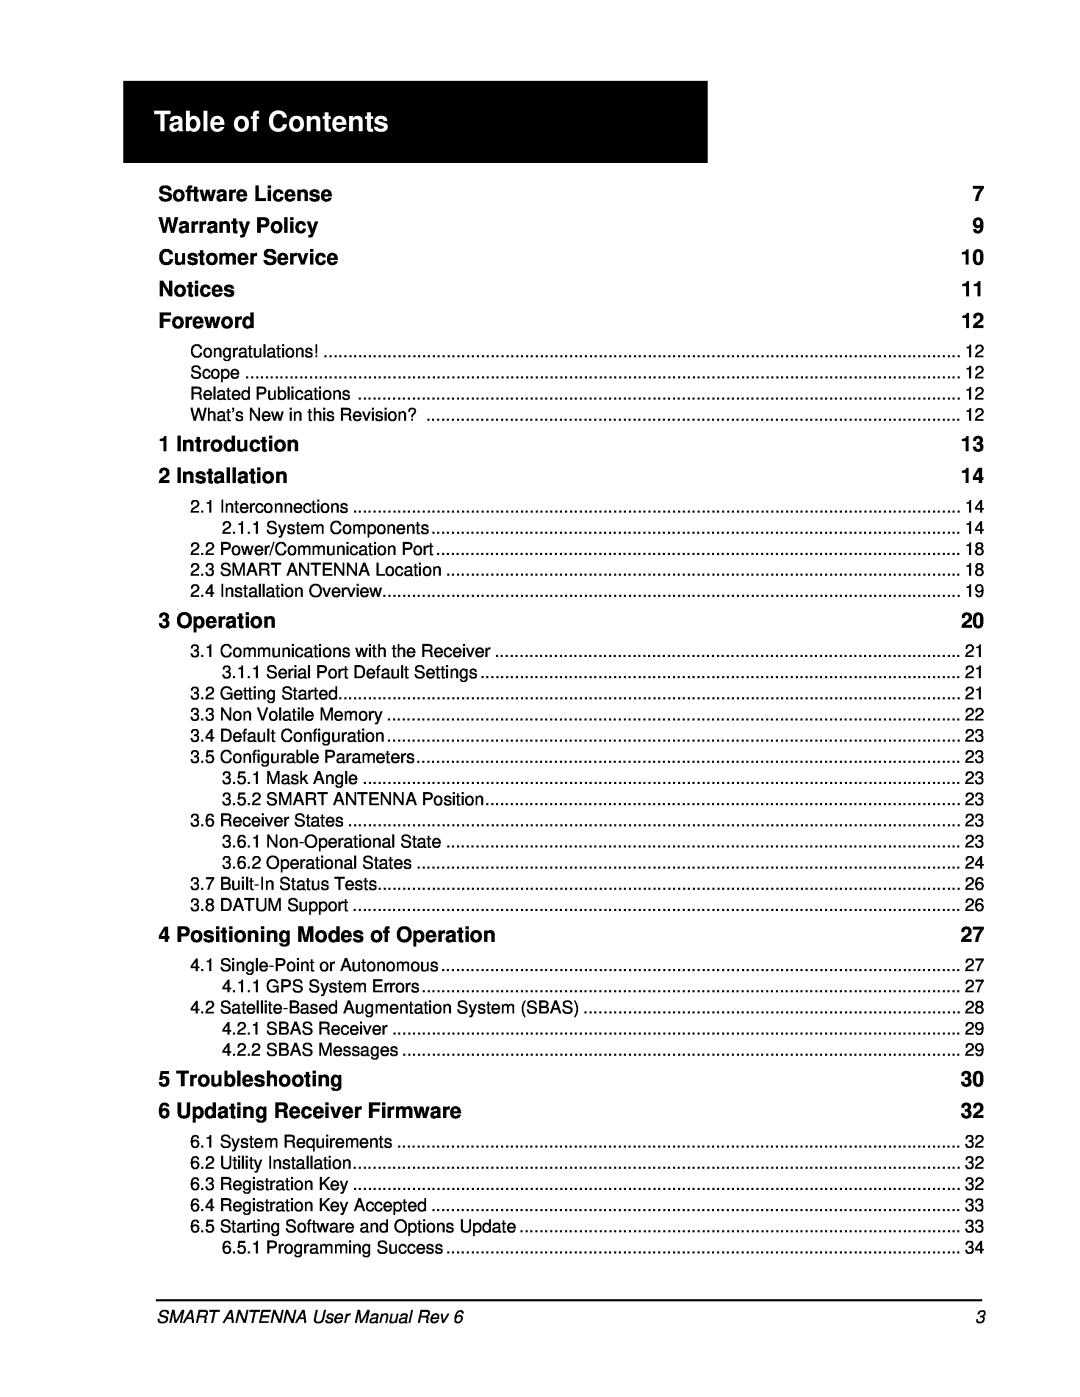 Novatel SMART ANTENNA user manual Table of Contents 